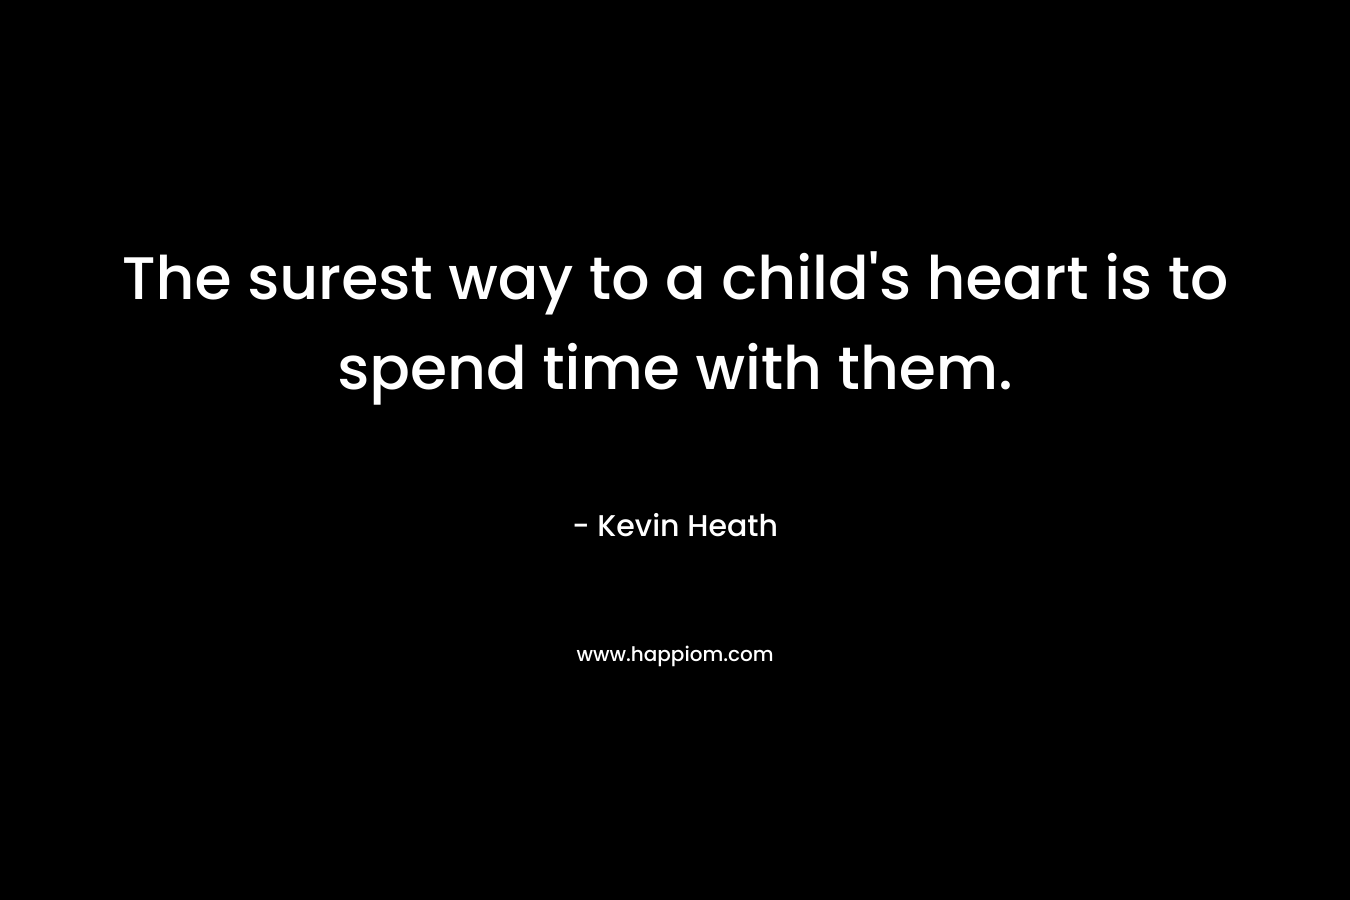 The surest way to a child's heart is to spend time with them.